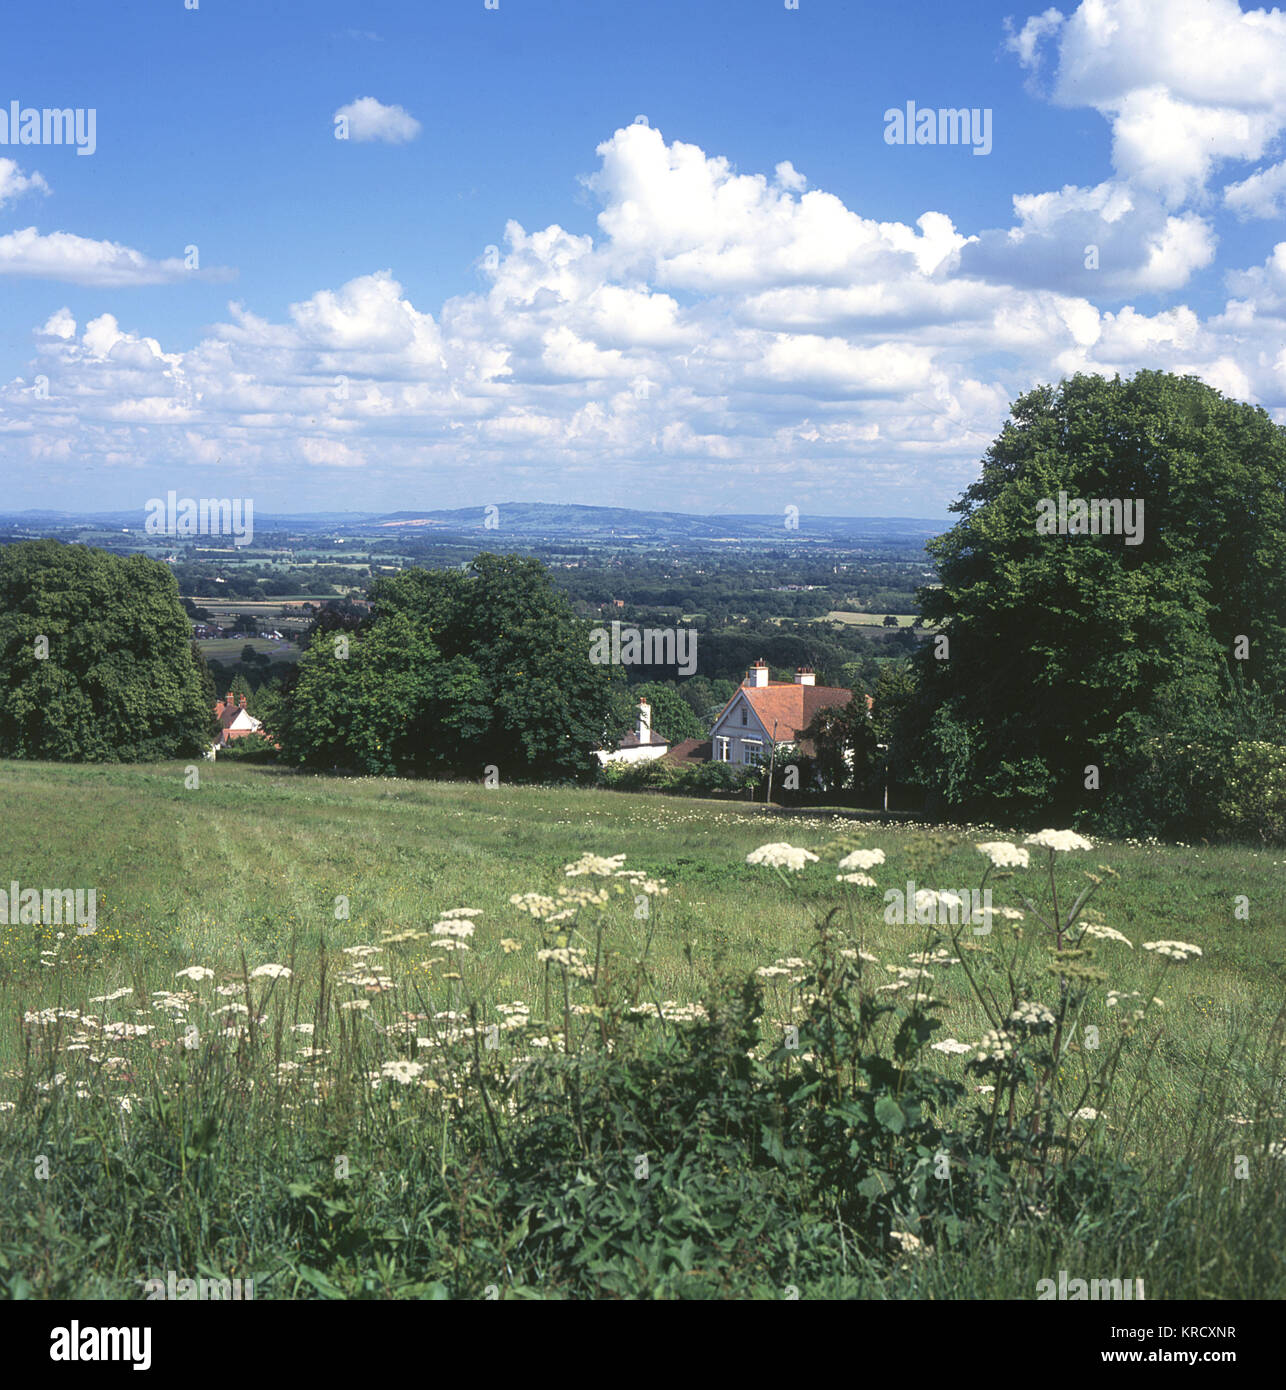 The Vale of Severn, looking  eastwards towards Bredon Hill  from below the Malverns,  Worcestershire, England.       Date: 2004 Stock Photo